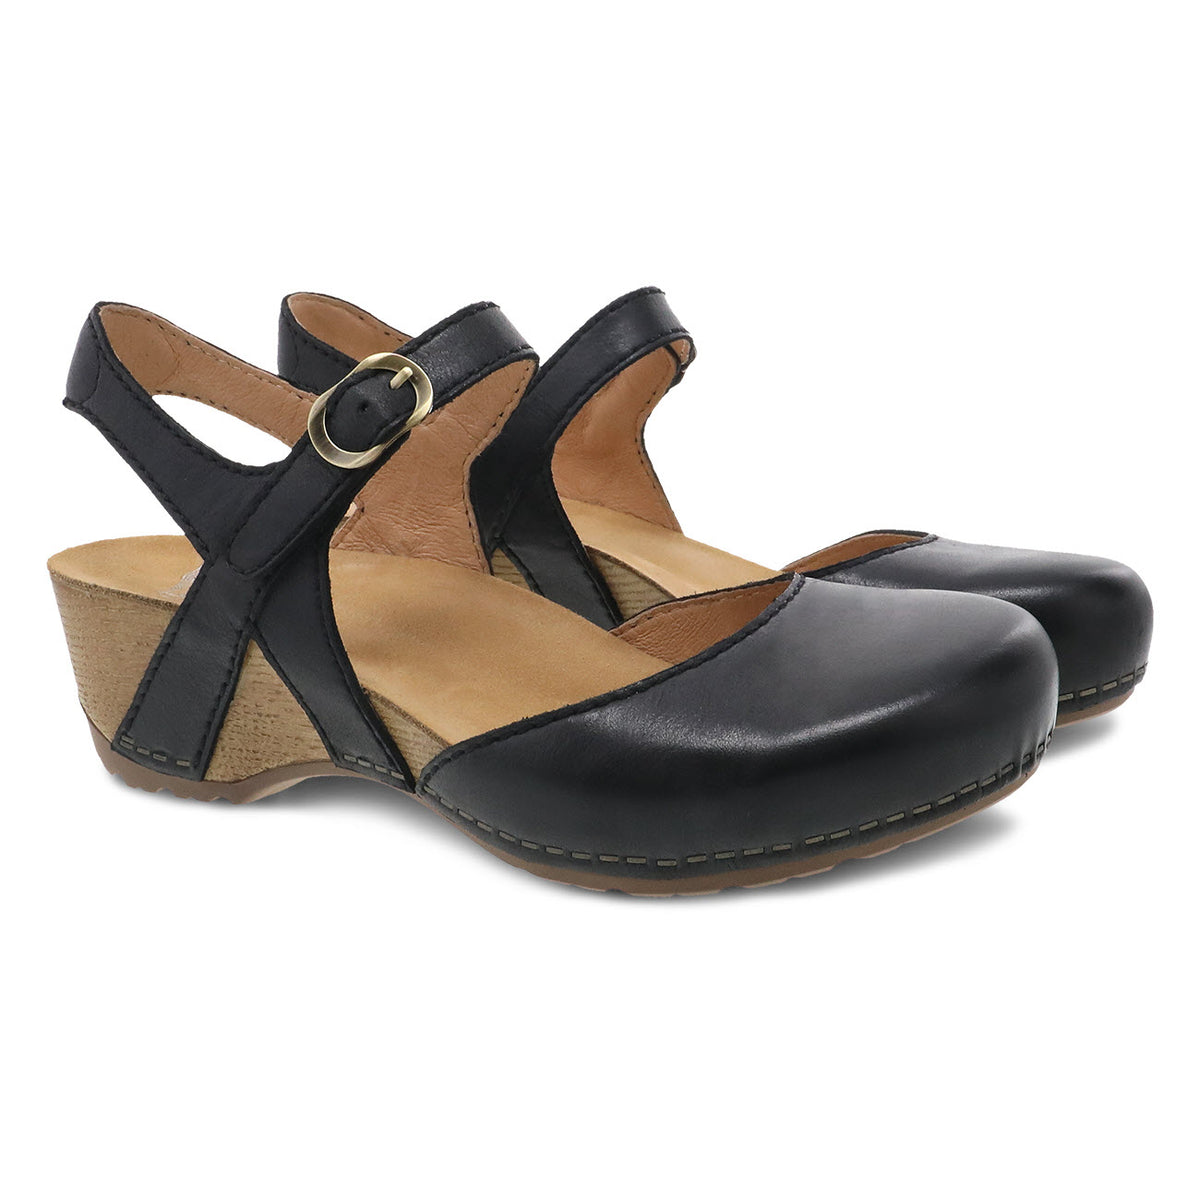 A pair of Dansko Tiffani black milled leather uppers sandals with a chunky heel and buckle strap.